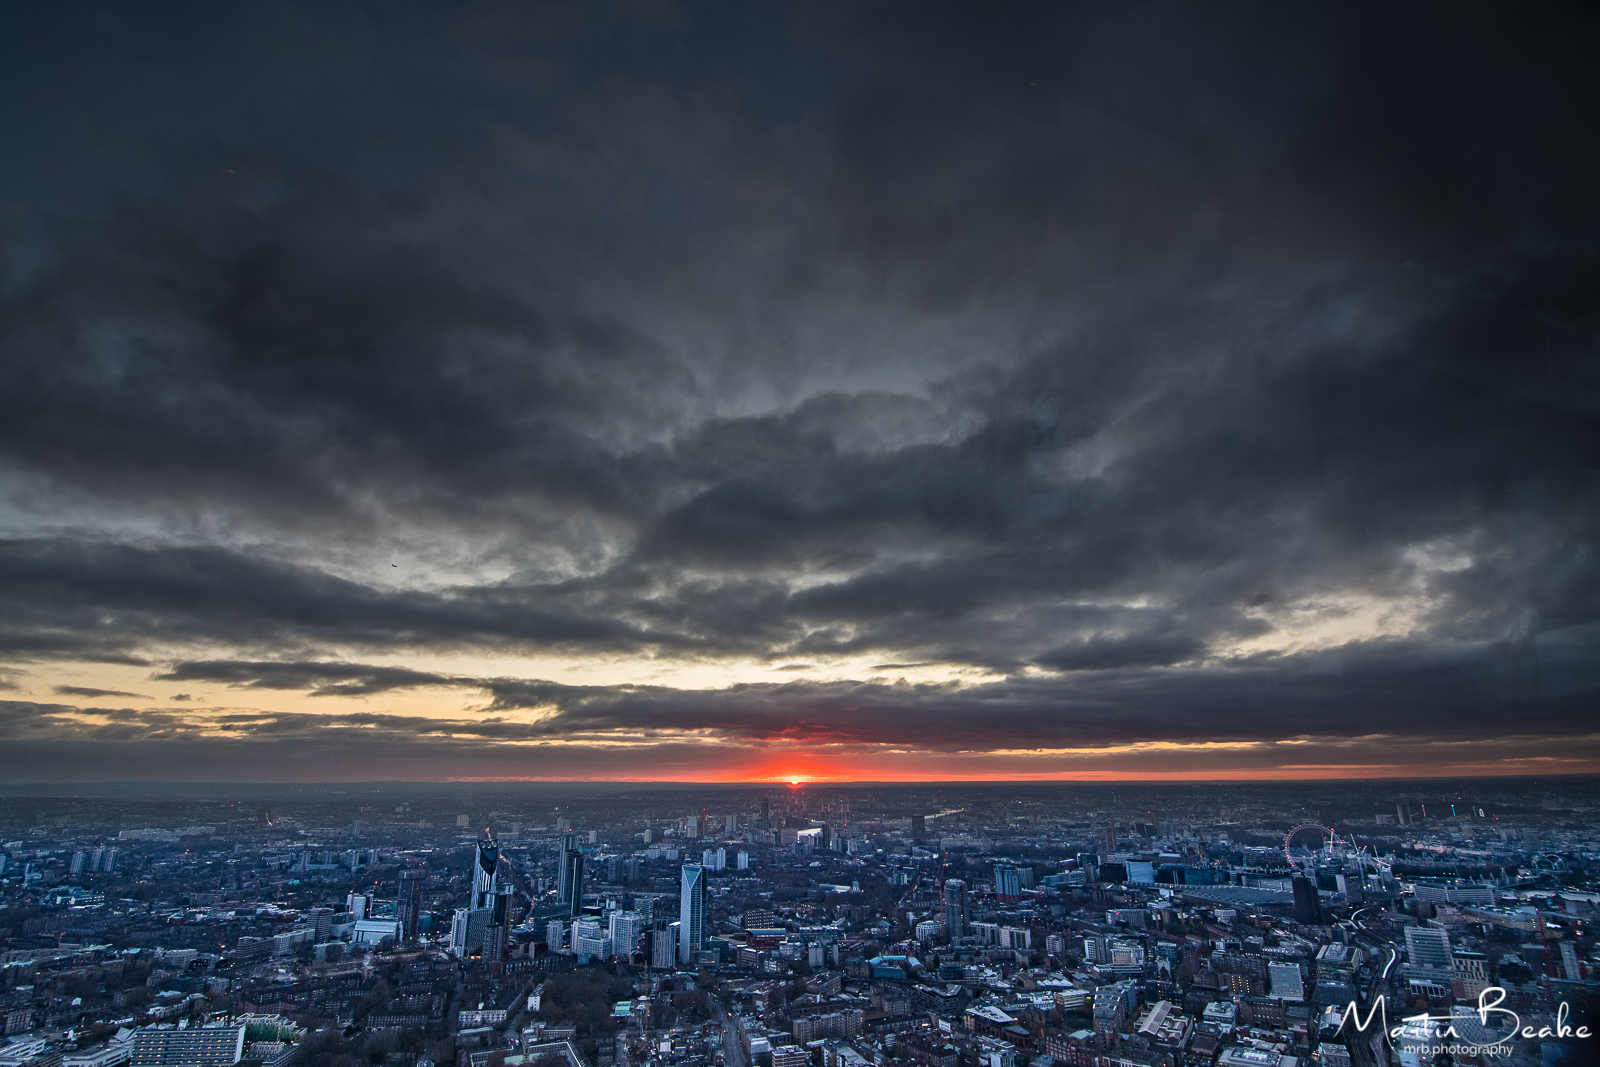 Dark Sunset over South West London from the Shard